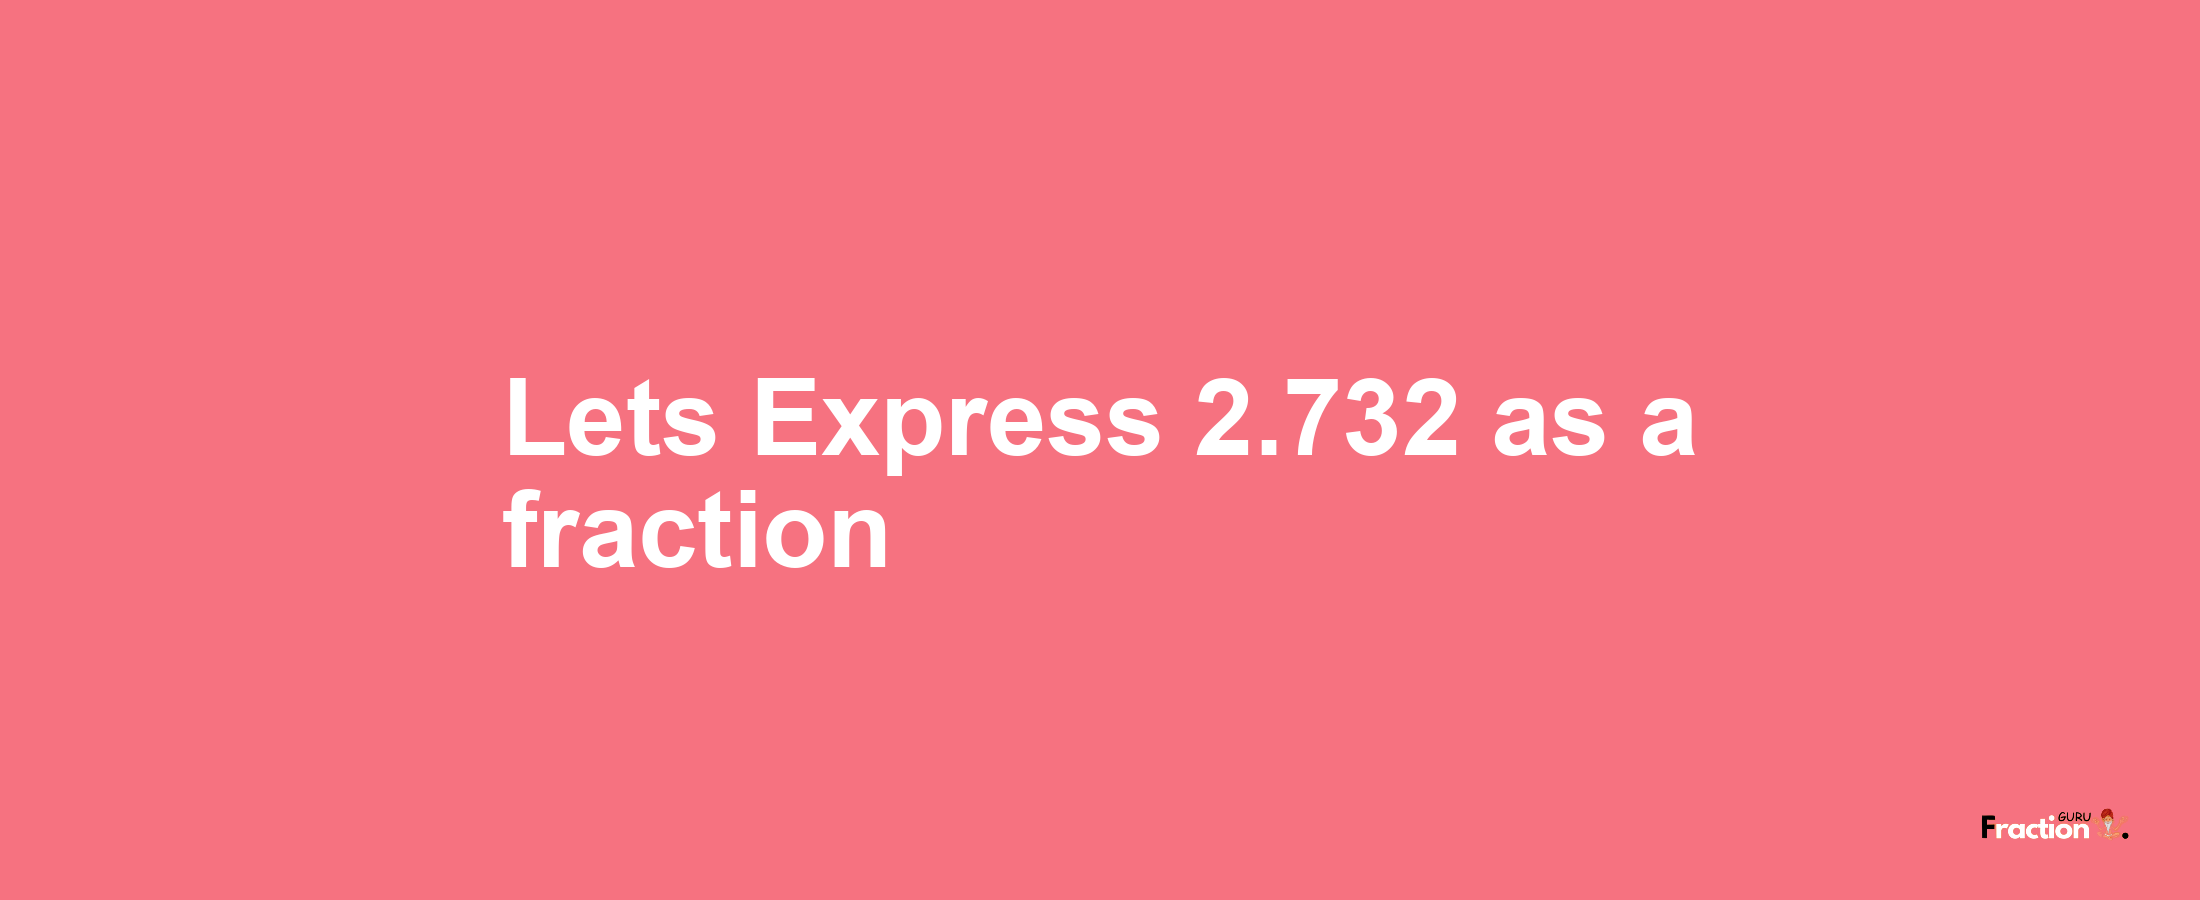 Lets Express 2.732 as afraction